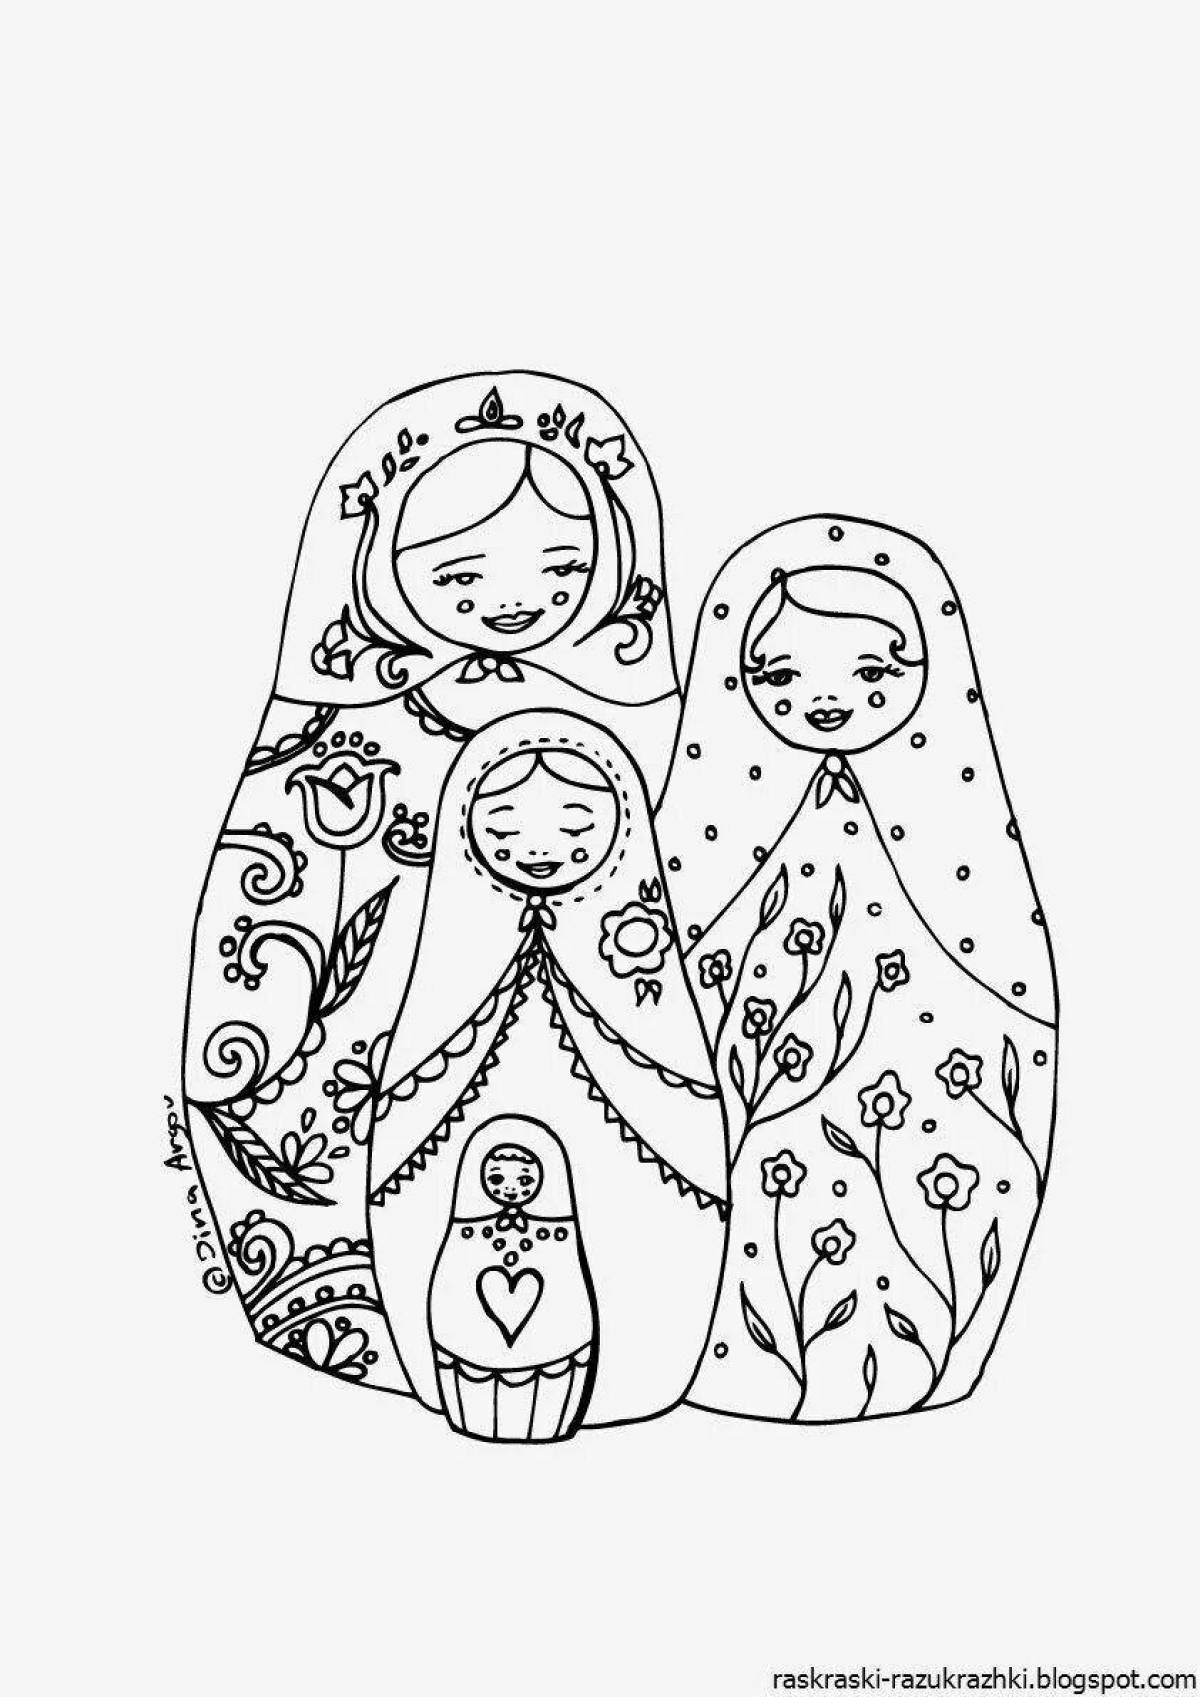 Coloring book for nesting dolls color-frenzy